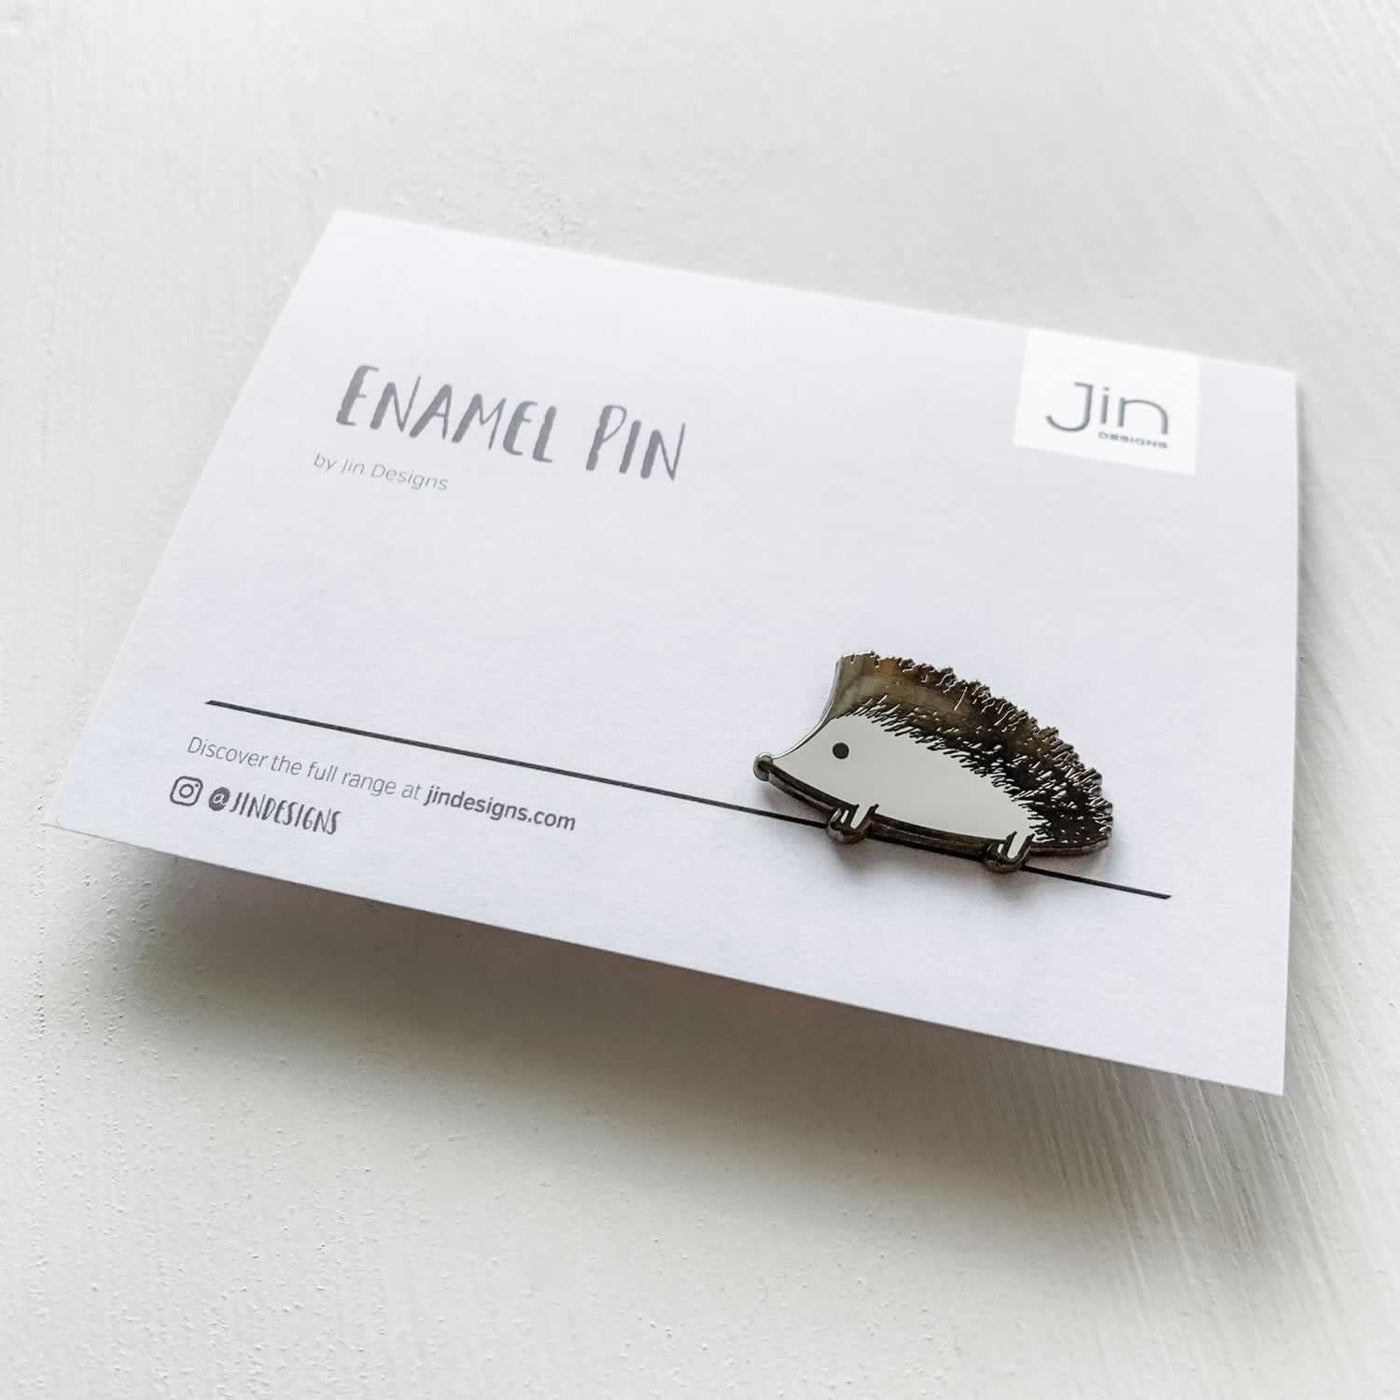 Hedgehog Enamel Pin with Backing Card